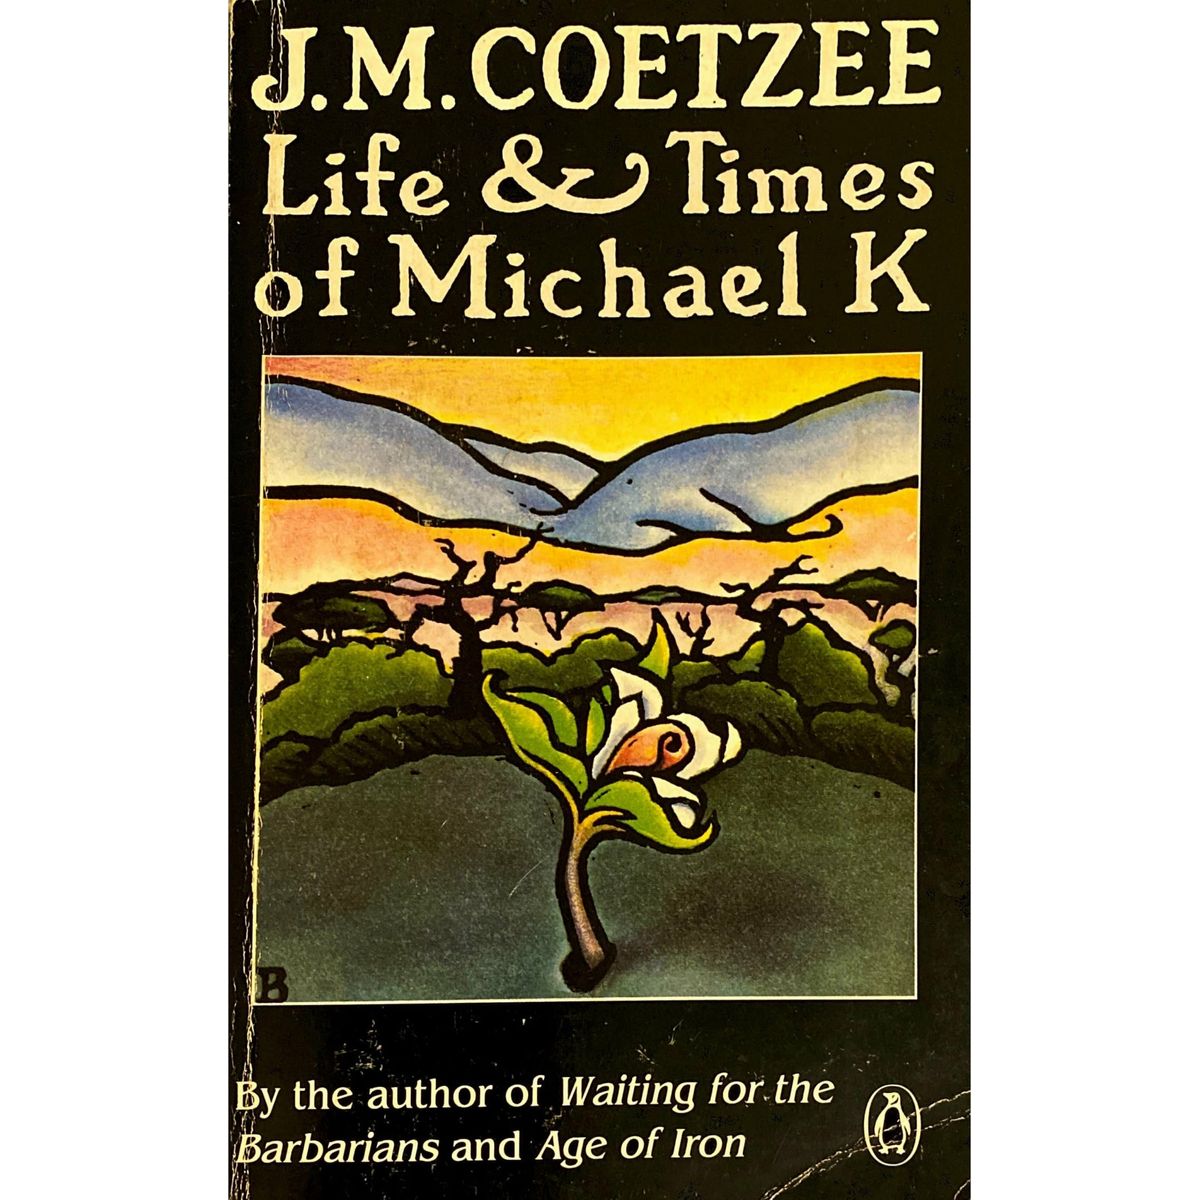 ISBN: 9780140074482 / 0140074481 - The Life and Times of Michael K by J.M. Coetzee [1985]